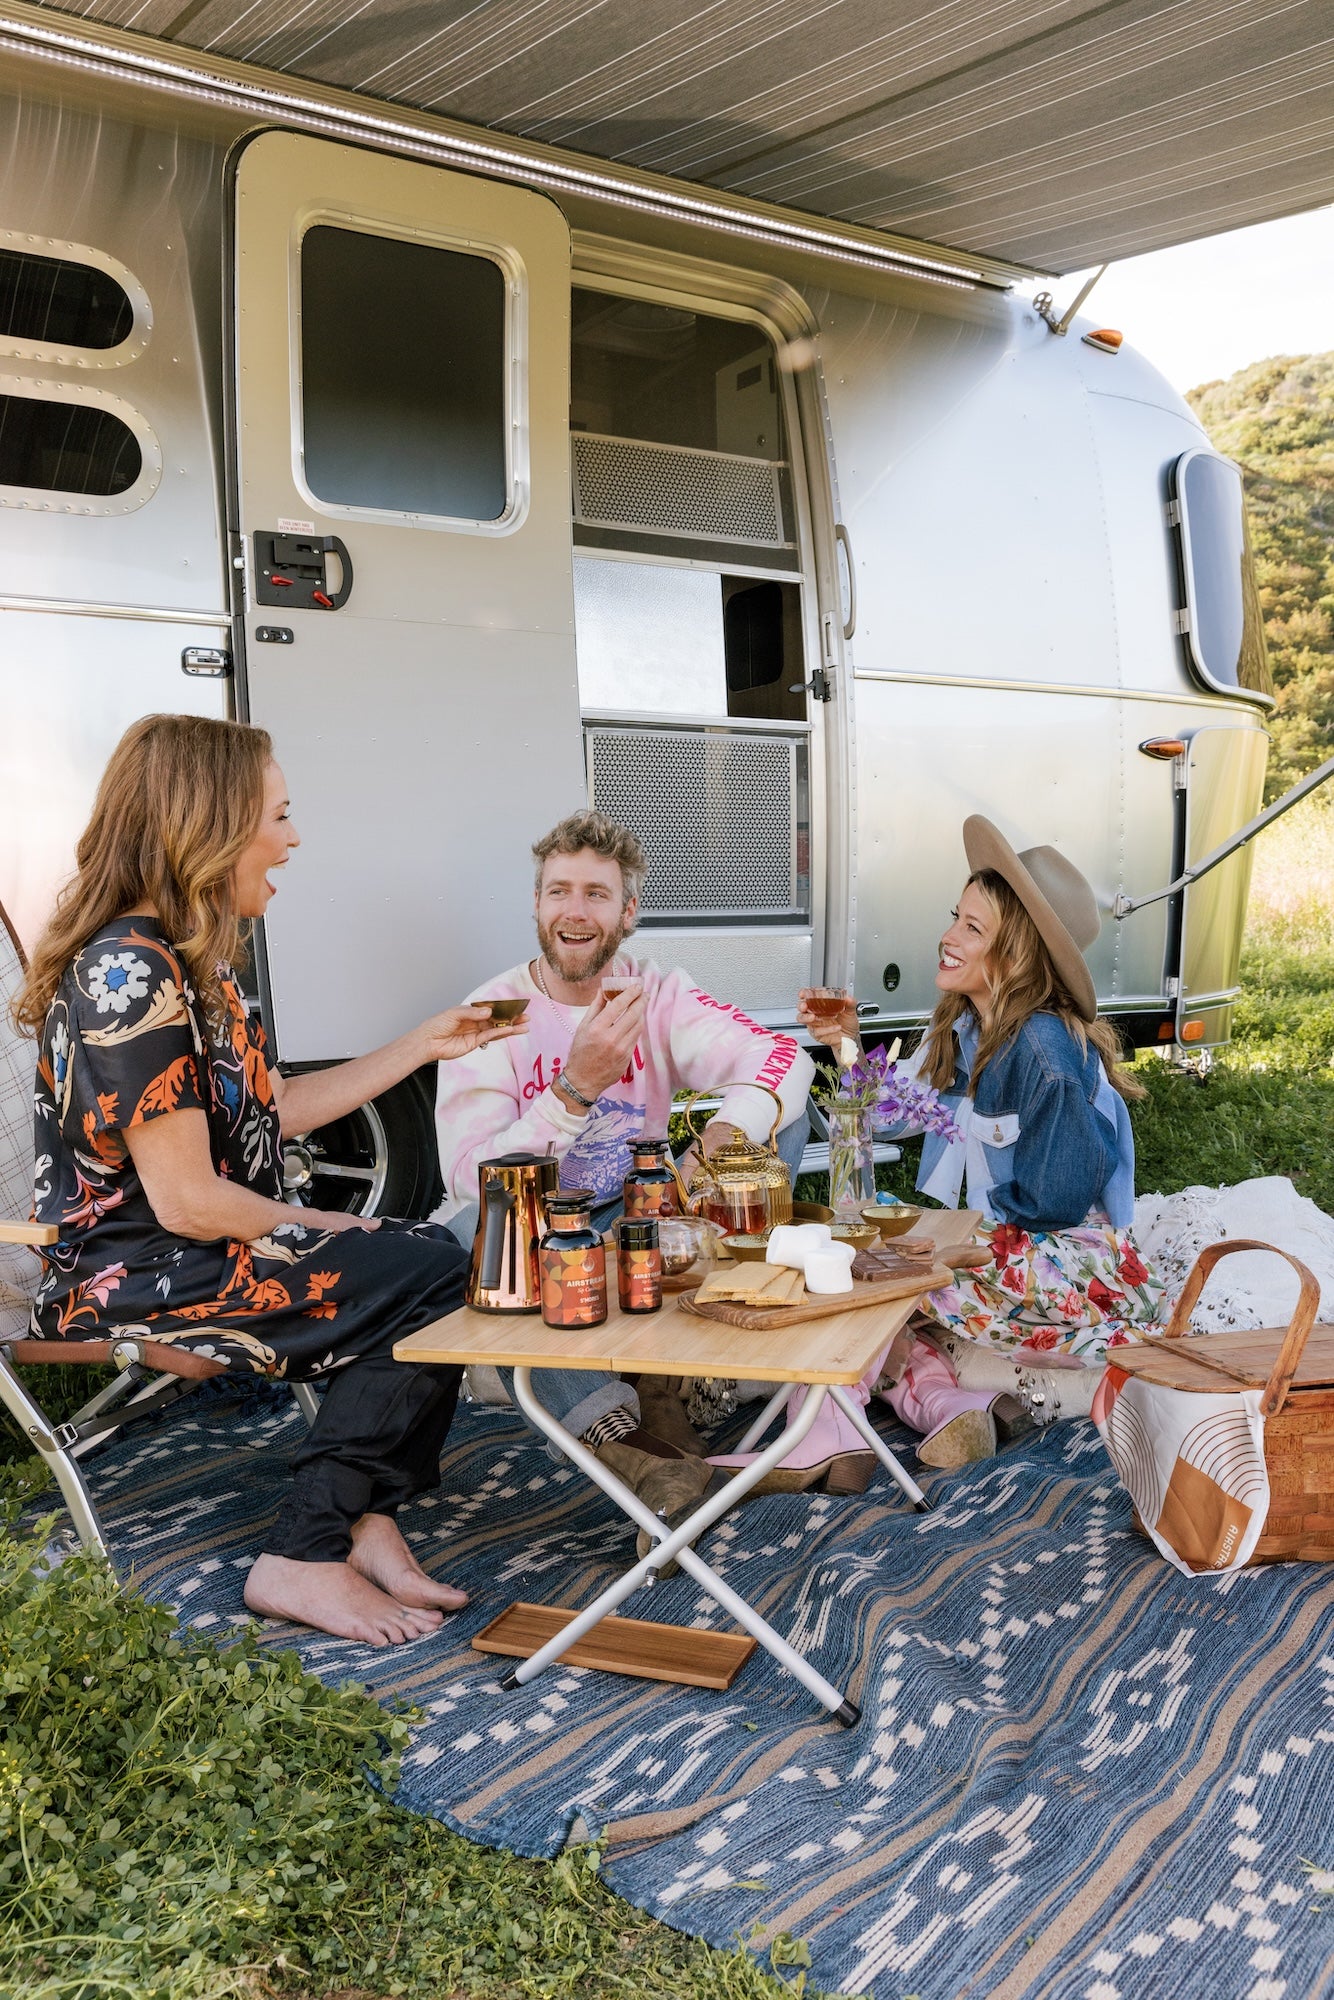 Three people sit on a patterned outdoor rug under the awning of an Airstream Camper, enjoying a picnic. They are surrounded by various foods, drinks, and loose leaf tea on a low table. The setting is sunny with a grassy landscape in the background. All three are smiling and interacting.